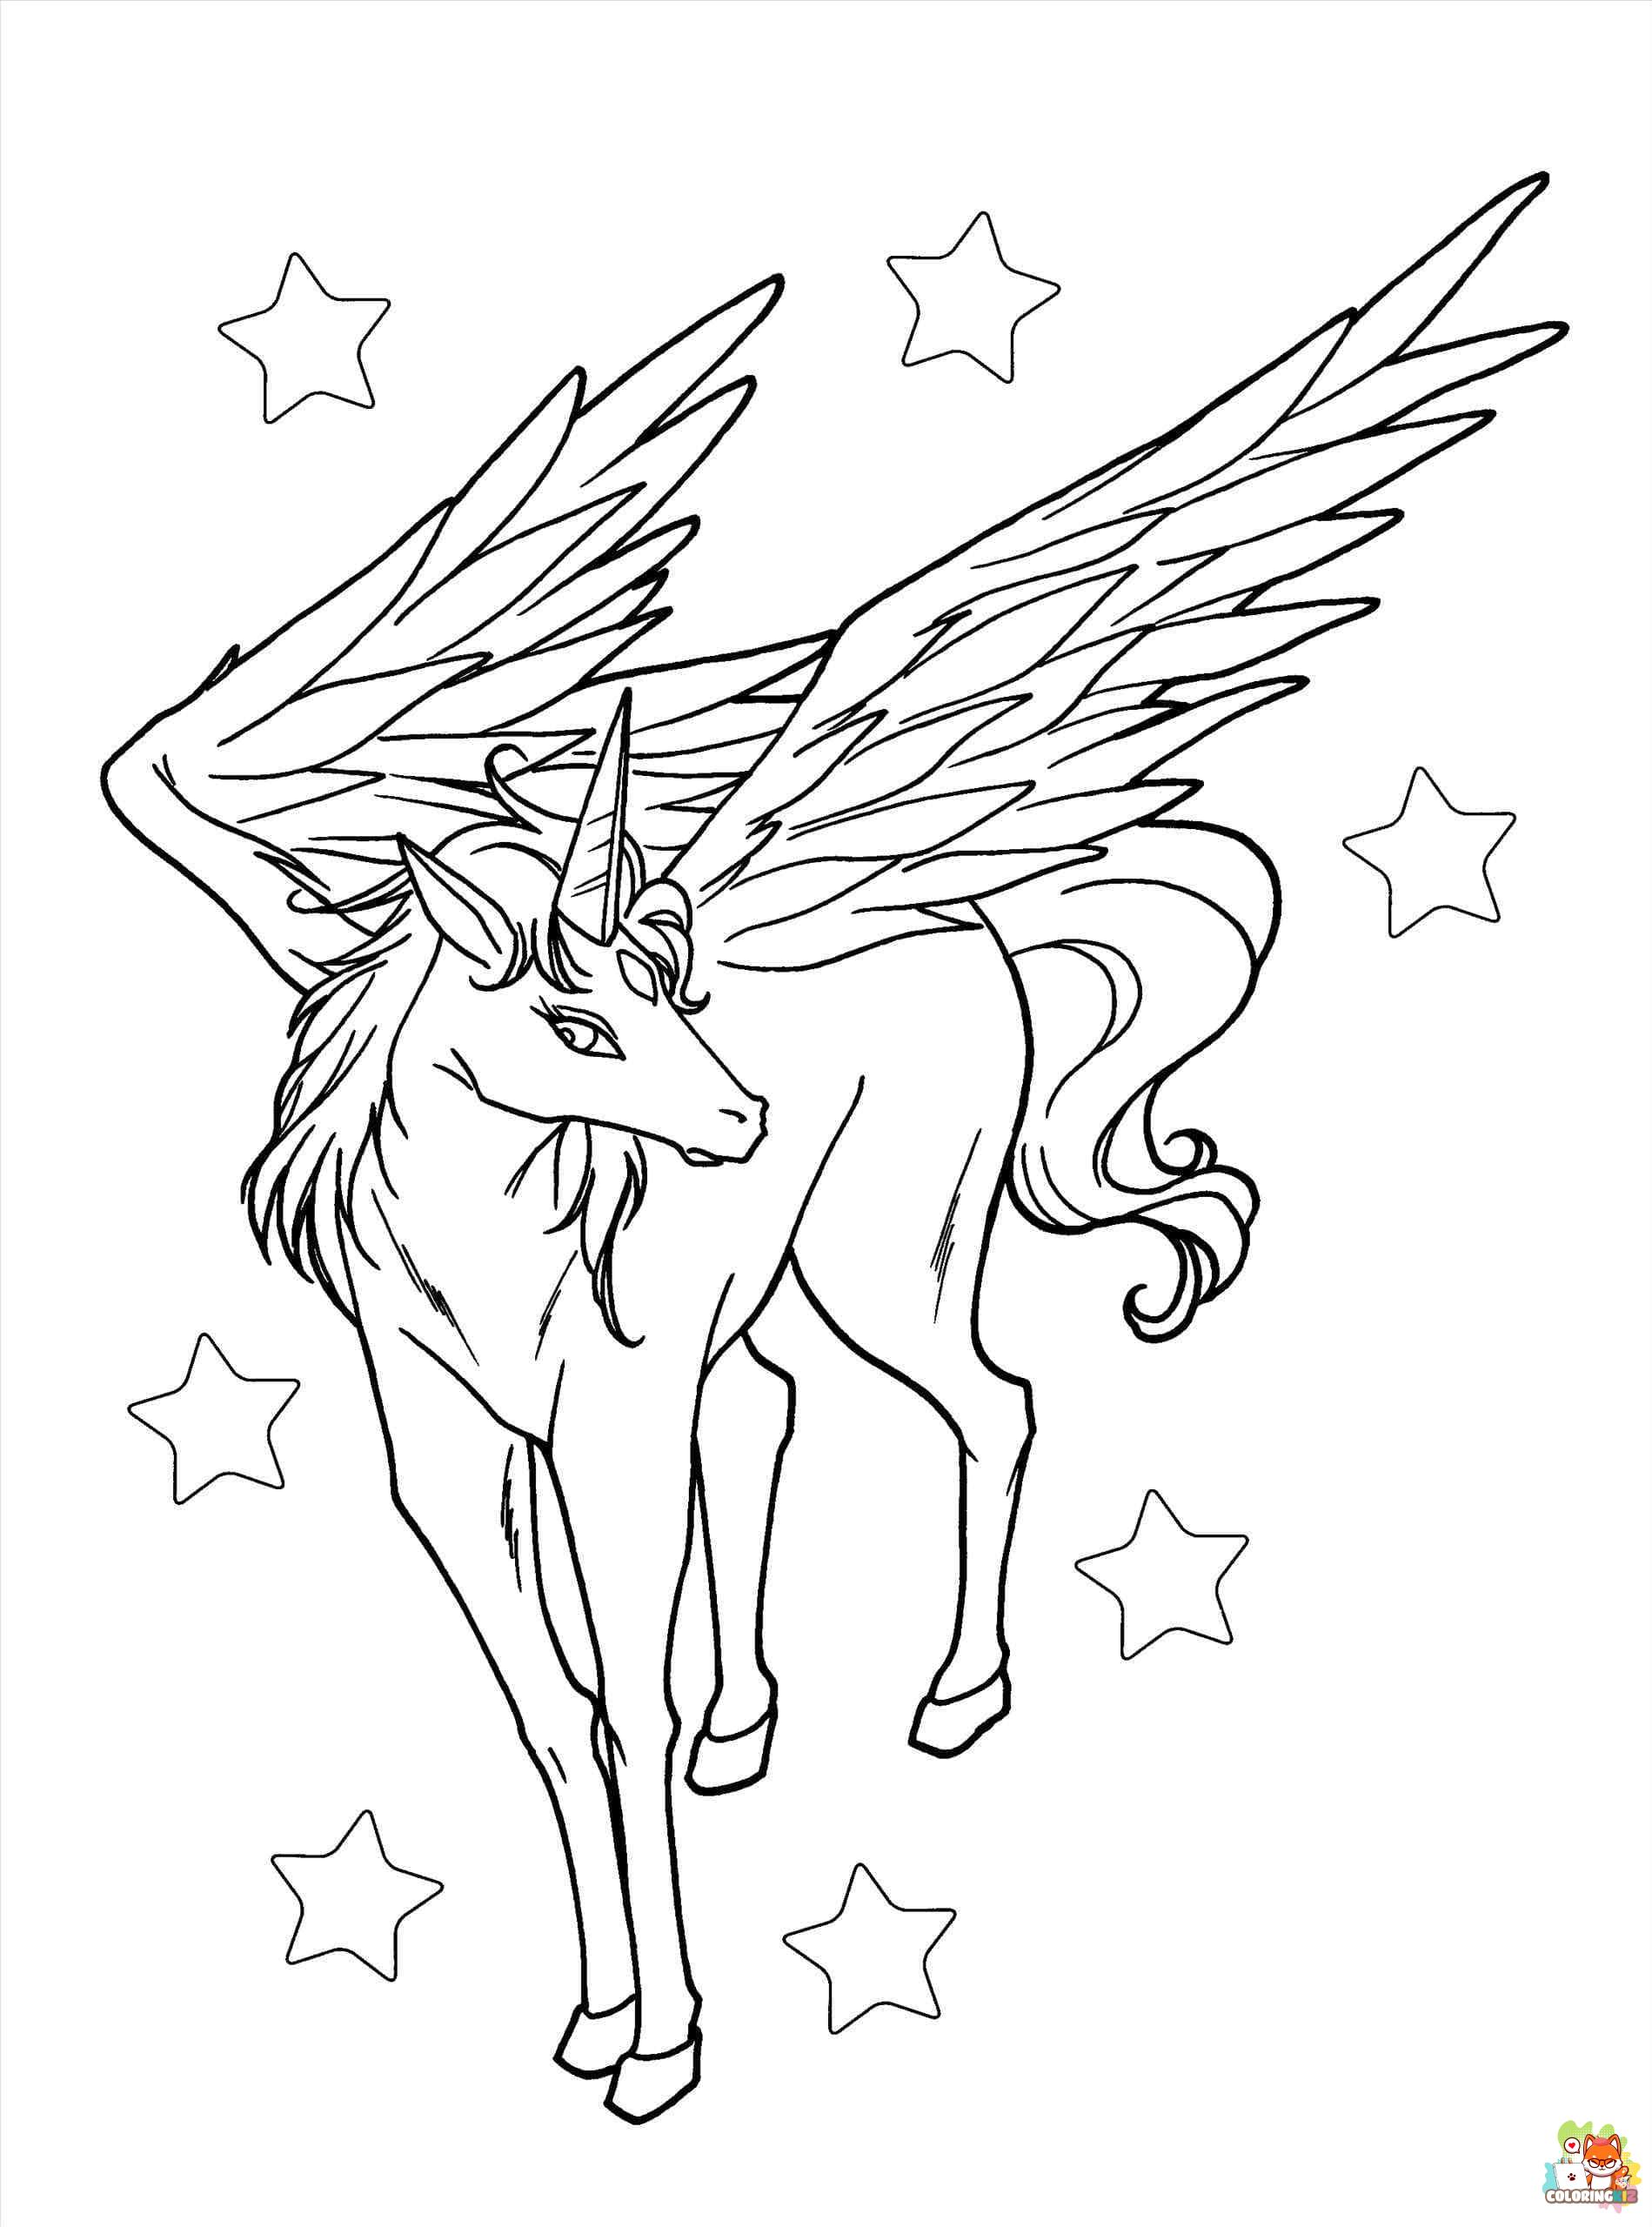 Winged Unicorn Coloring Pages 10